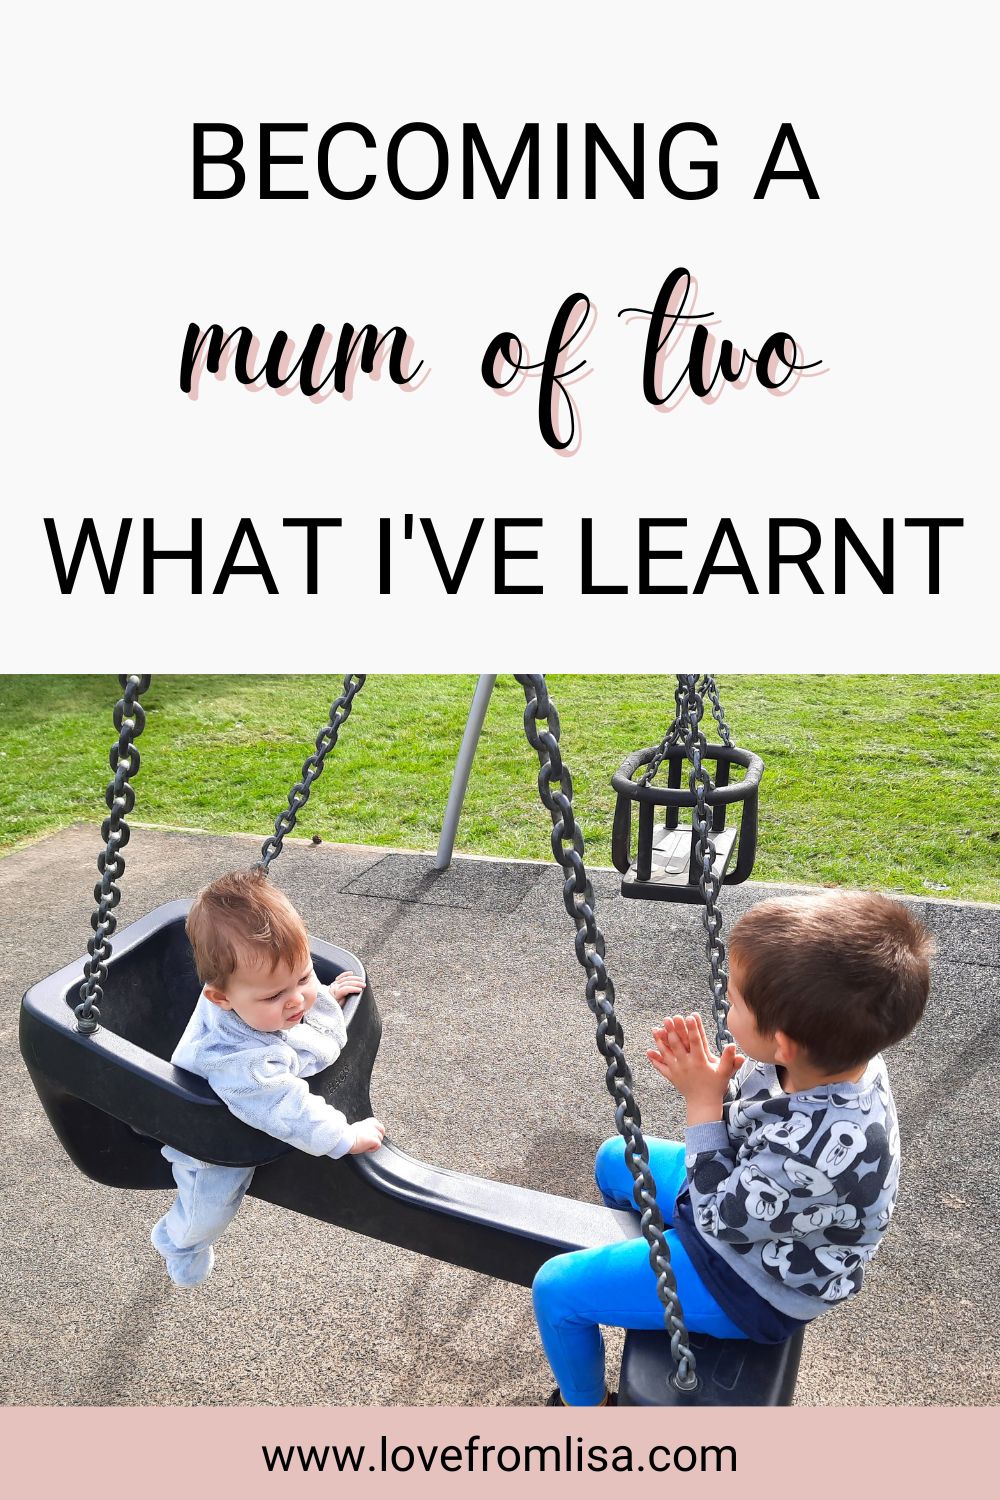 Since becoming a mum of two I’ve learnt a lot, from handling mum guilt, to asking for help. Here are some lessons I’ve learnt from becoming a second time mum.